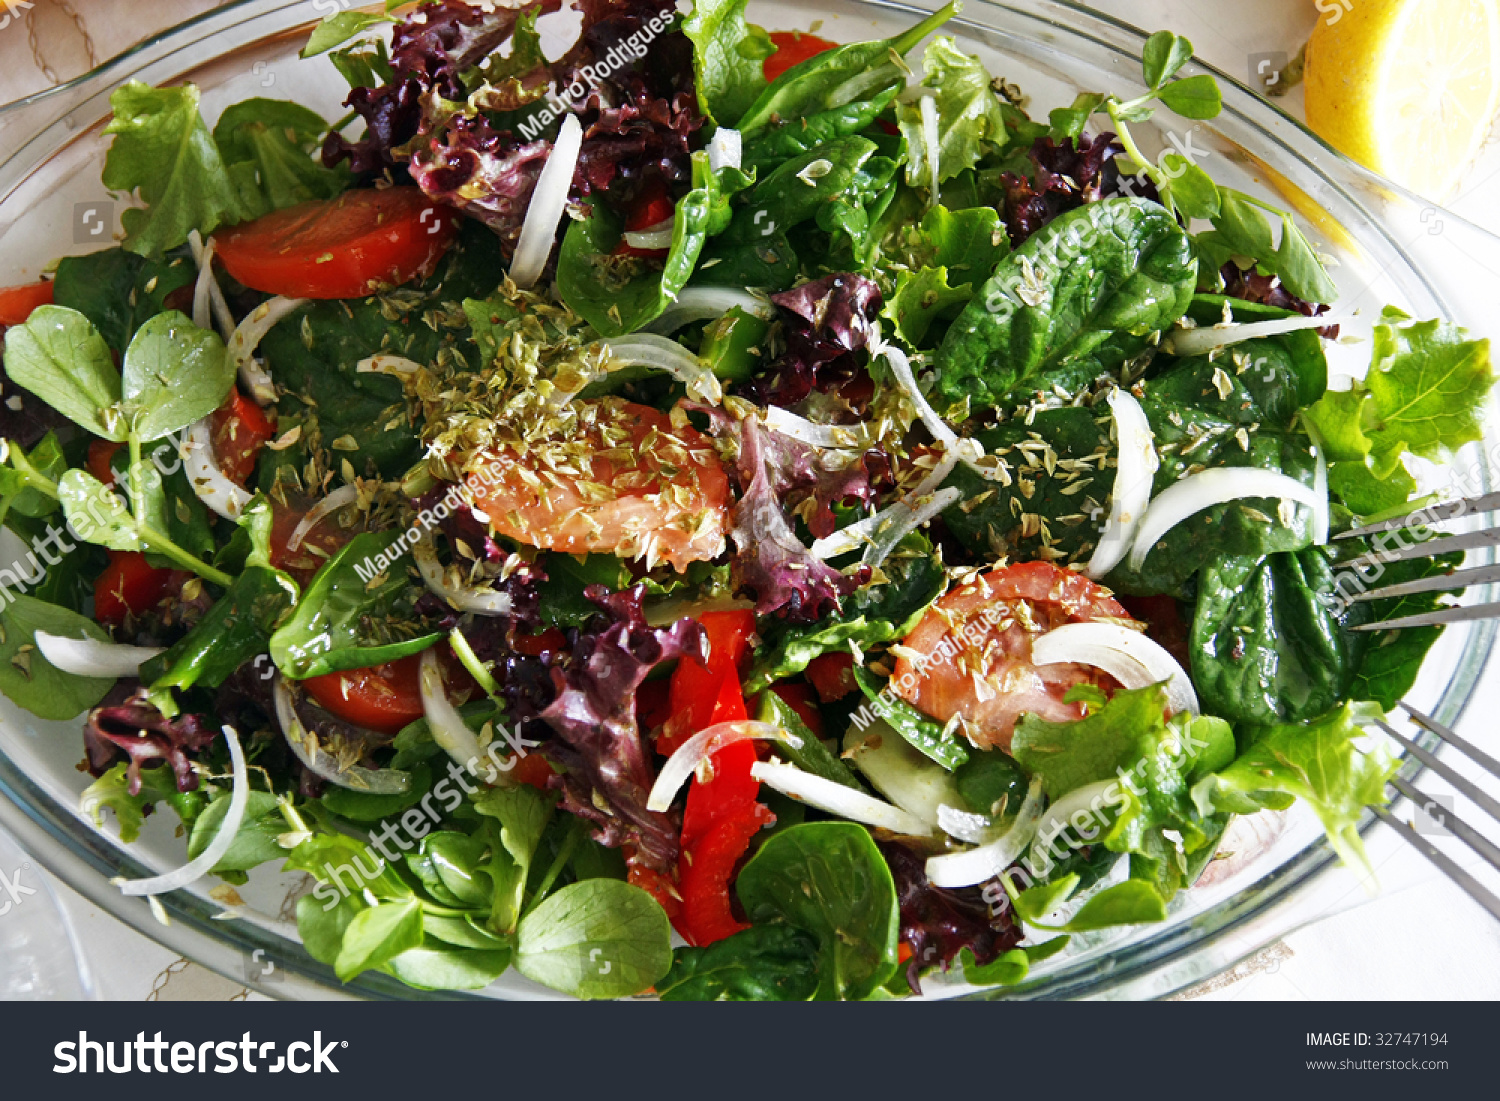 Table With Typical Portuguese Salad With Onions, Tomatoes And Pepper ...